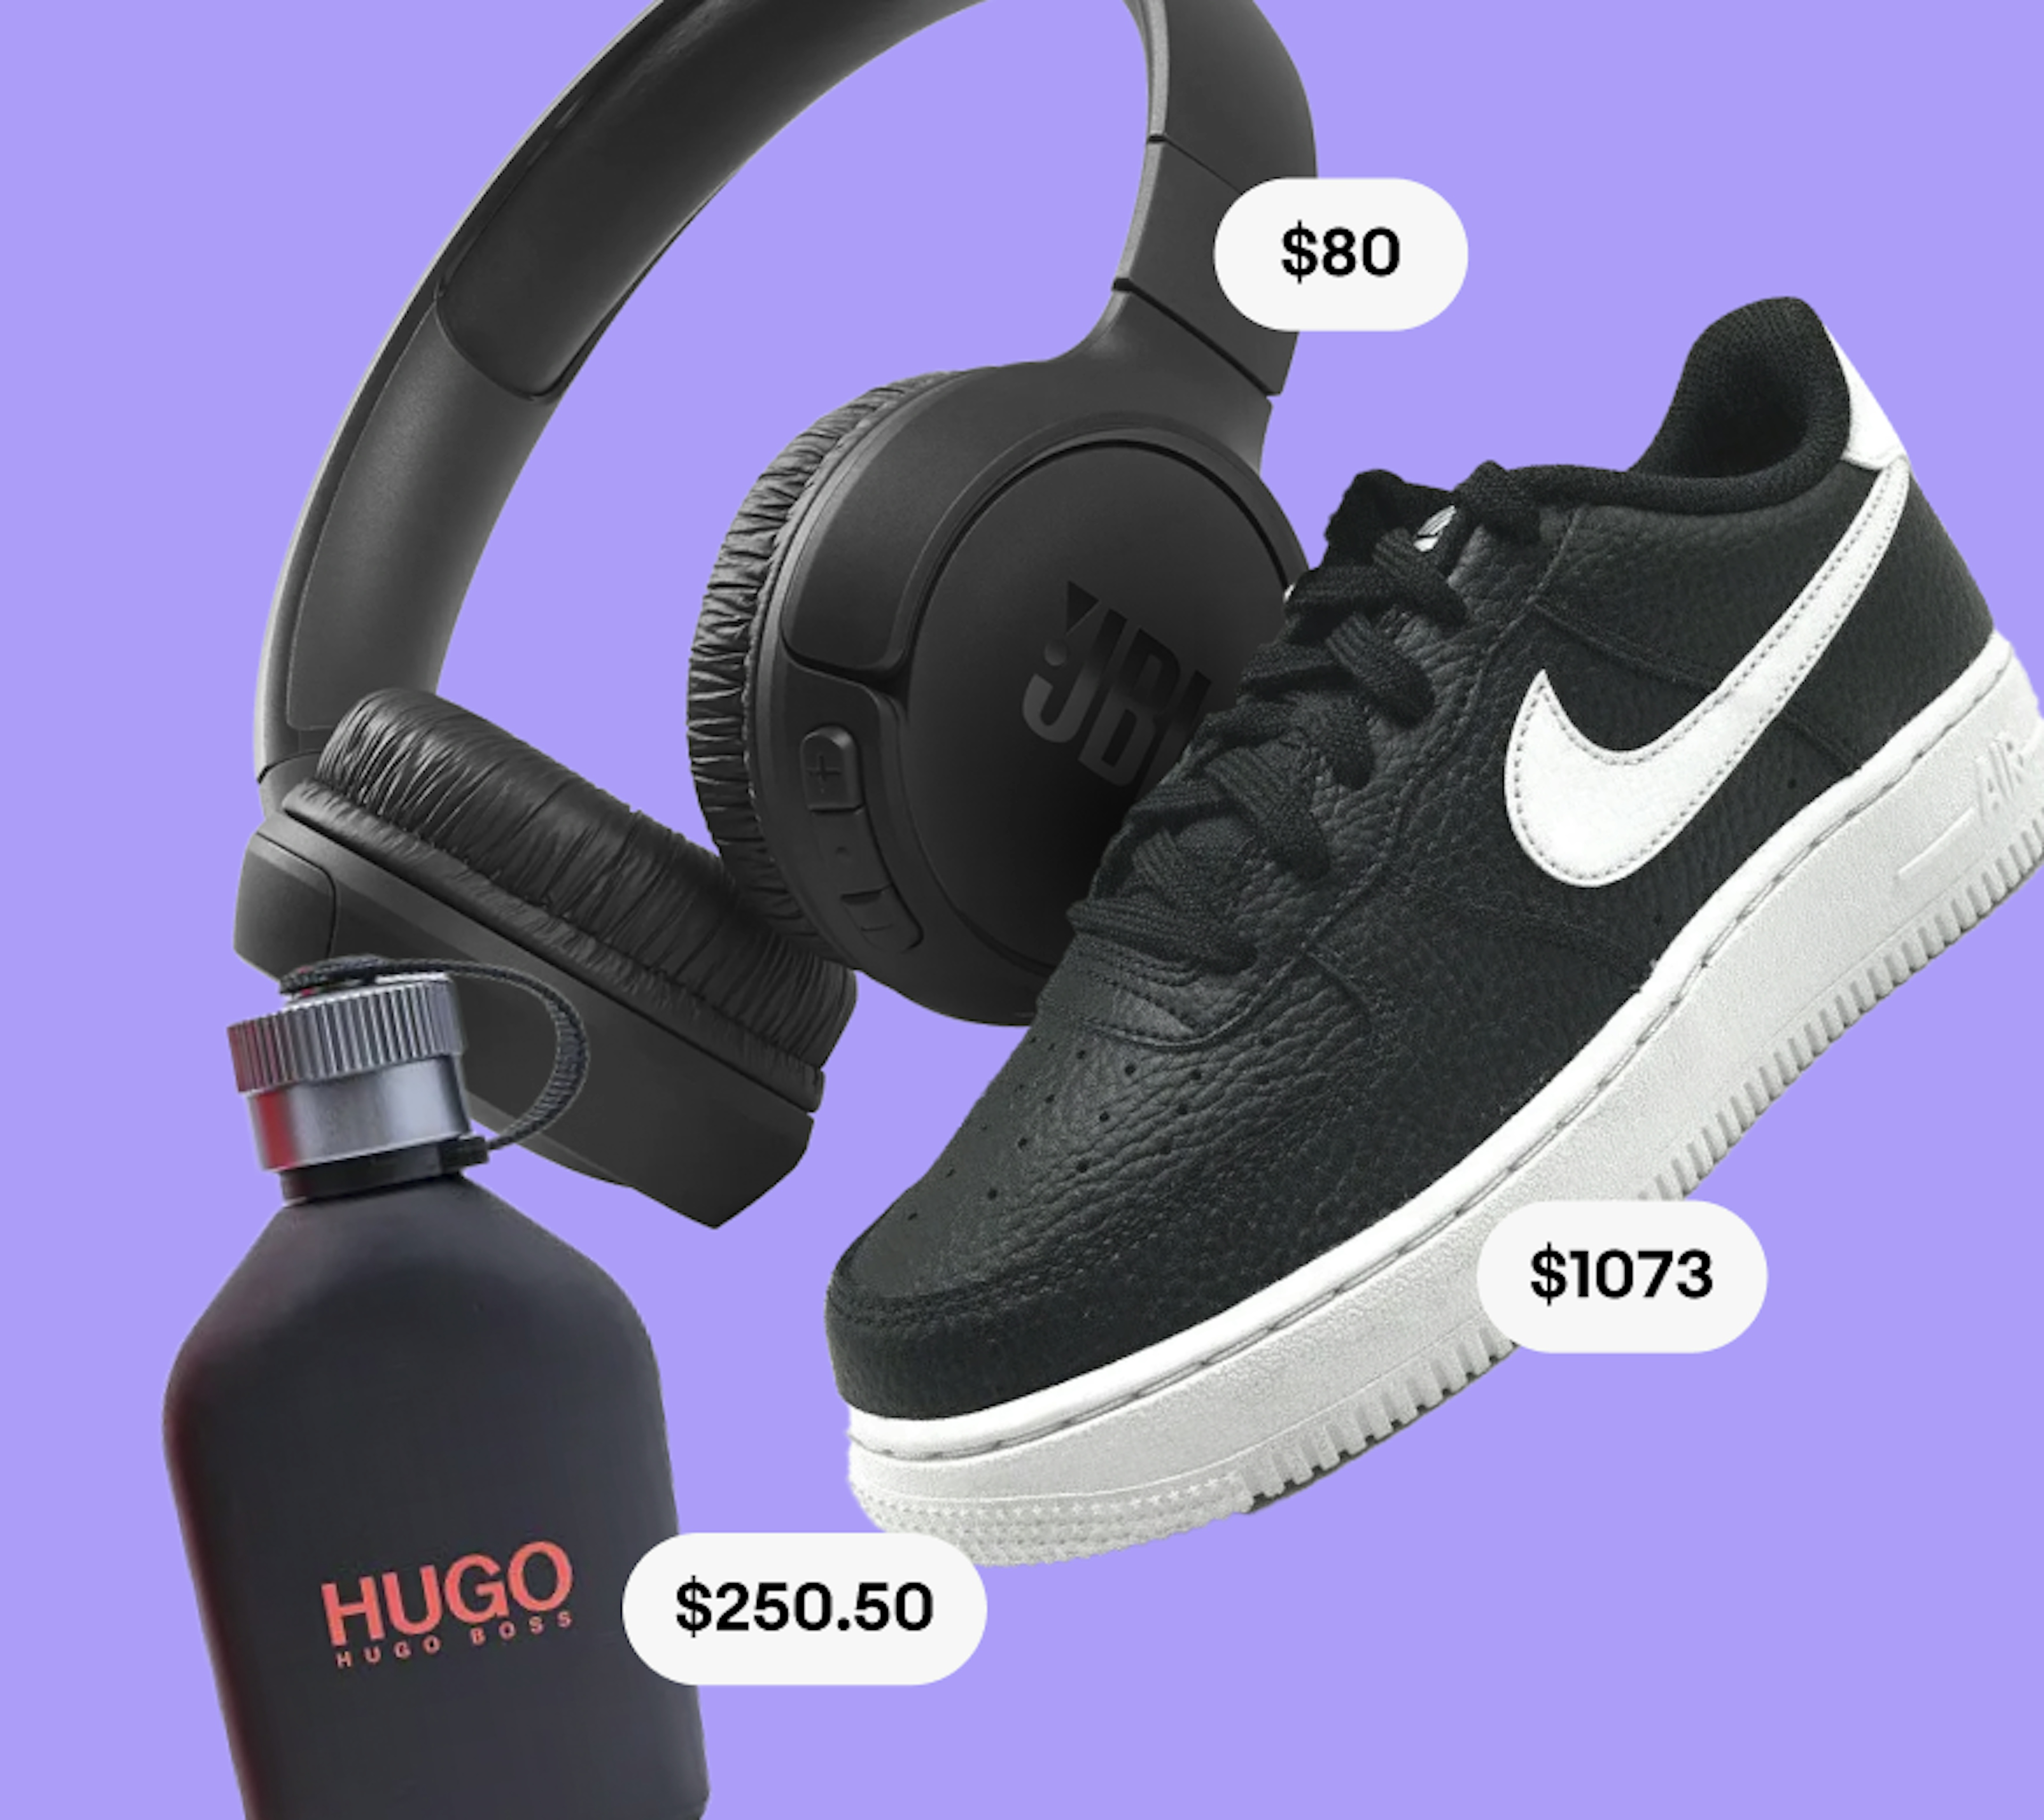 An arrangement of items with their prices displayed on a purple background, including JBL headphones priced at $80, a bottle of Hugo Boss perfume priced at $250.50, and a pair of Nike sneakers priced at $1073.